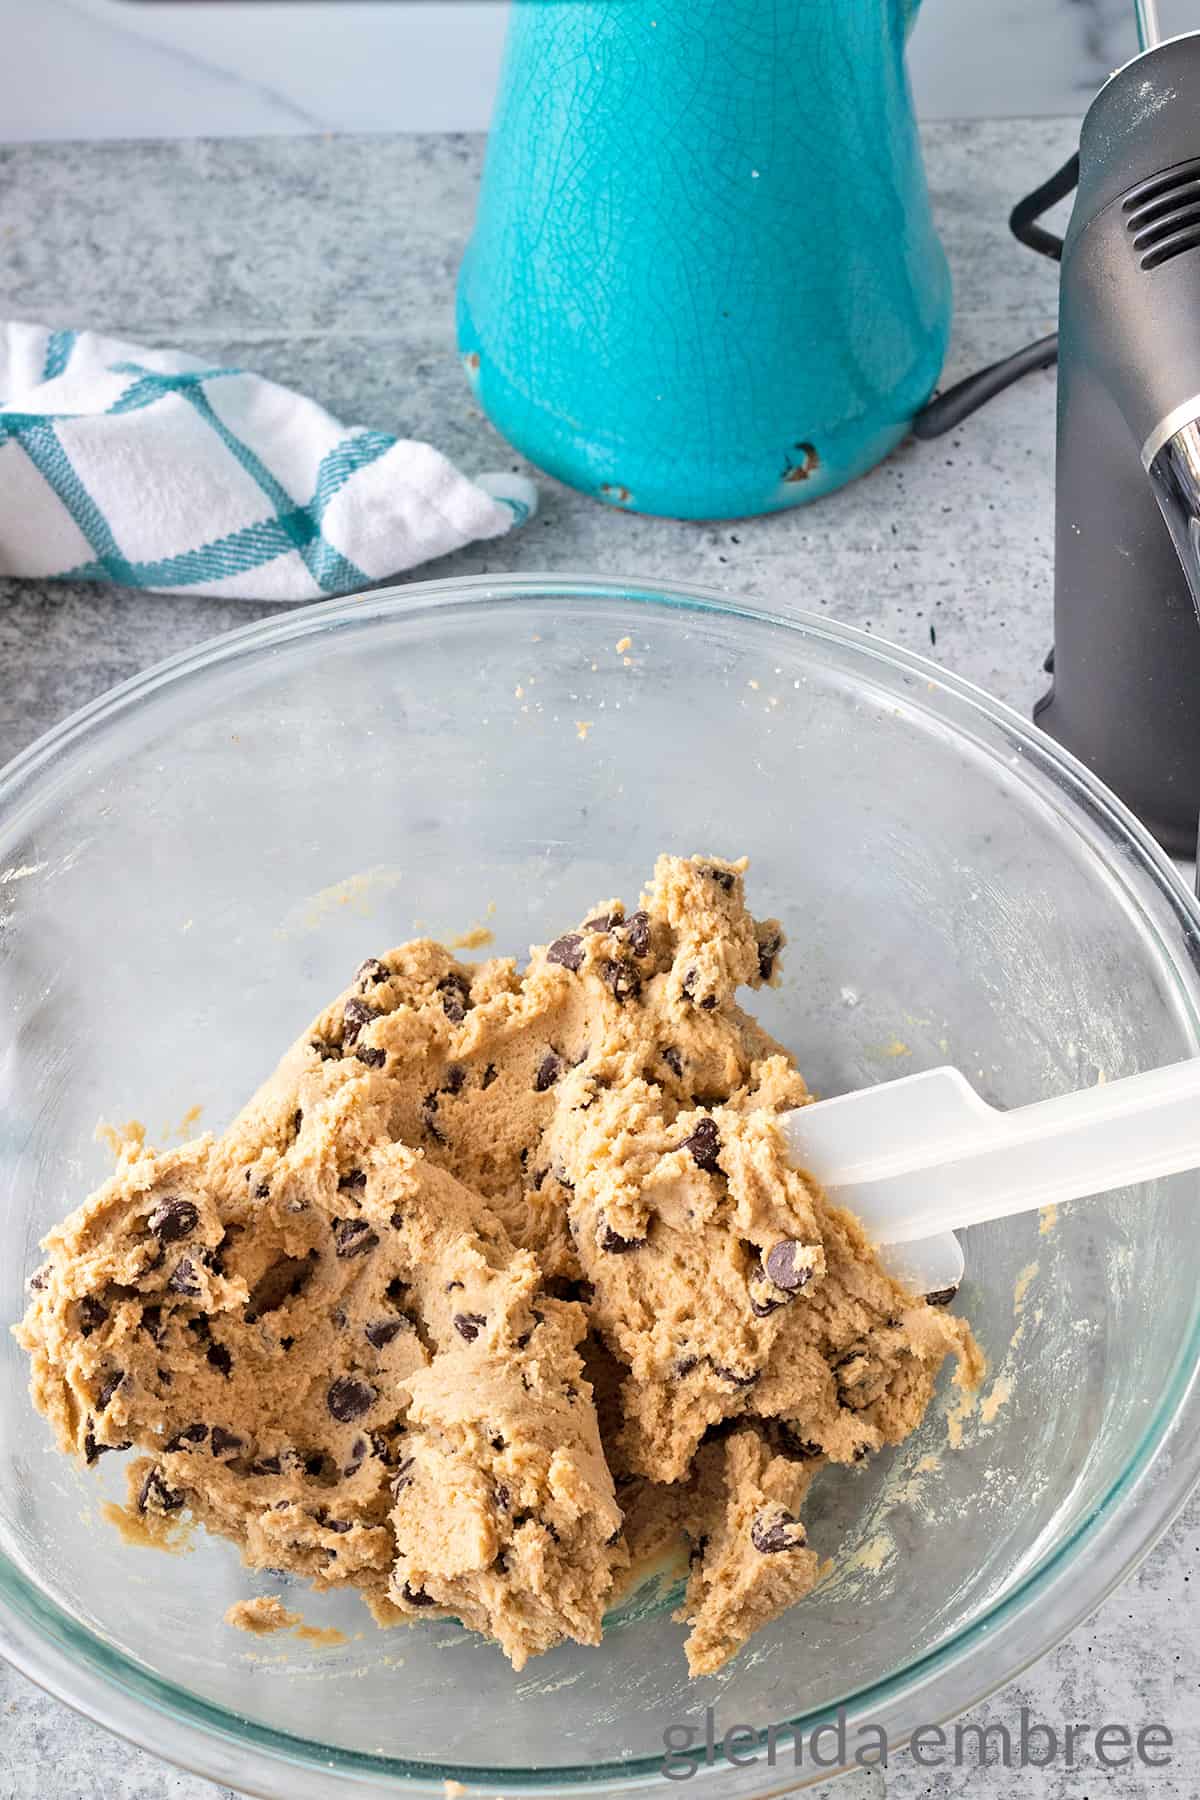 chocolate chip cookie dough completed in a clear bowl on a concrete countertop